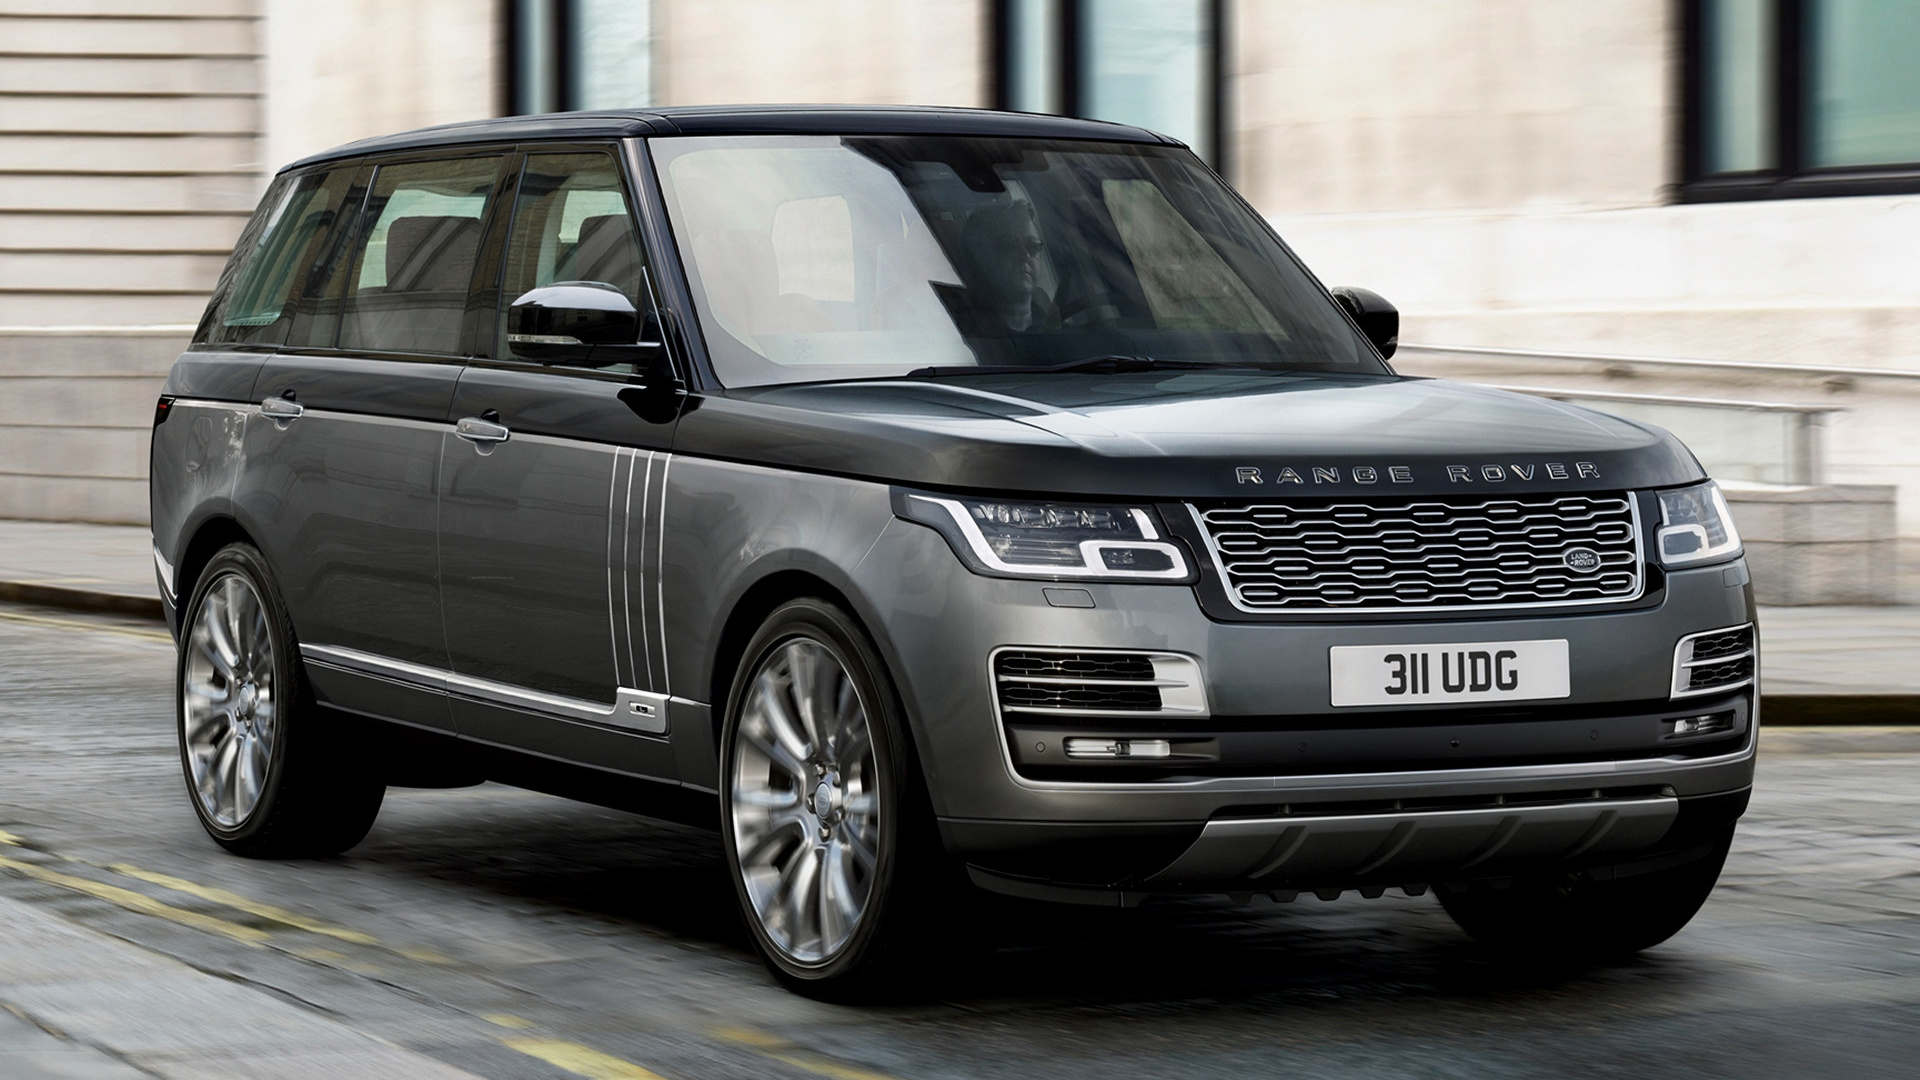 2018 Range Rover SVAutobiography [LWB] - Wallpapers and HD Images | Car ...